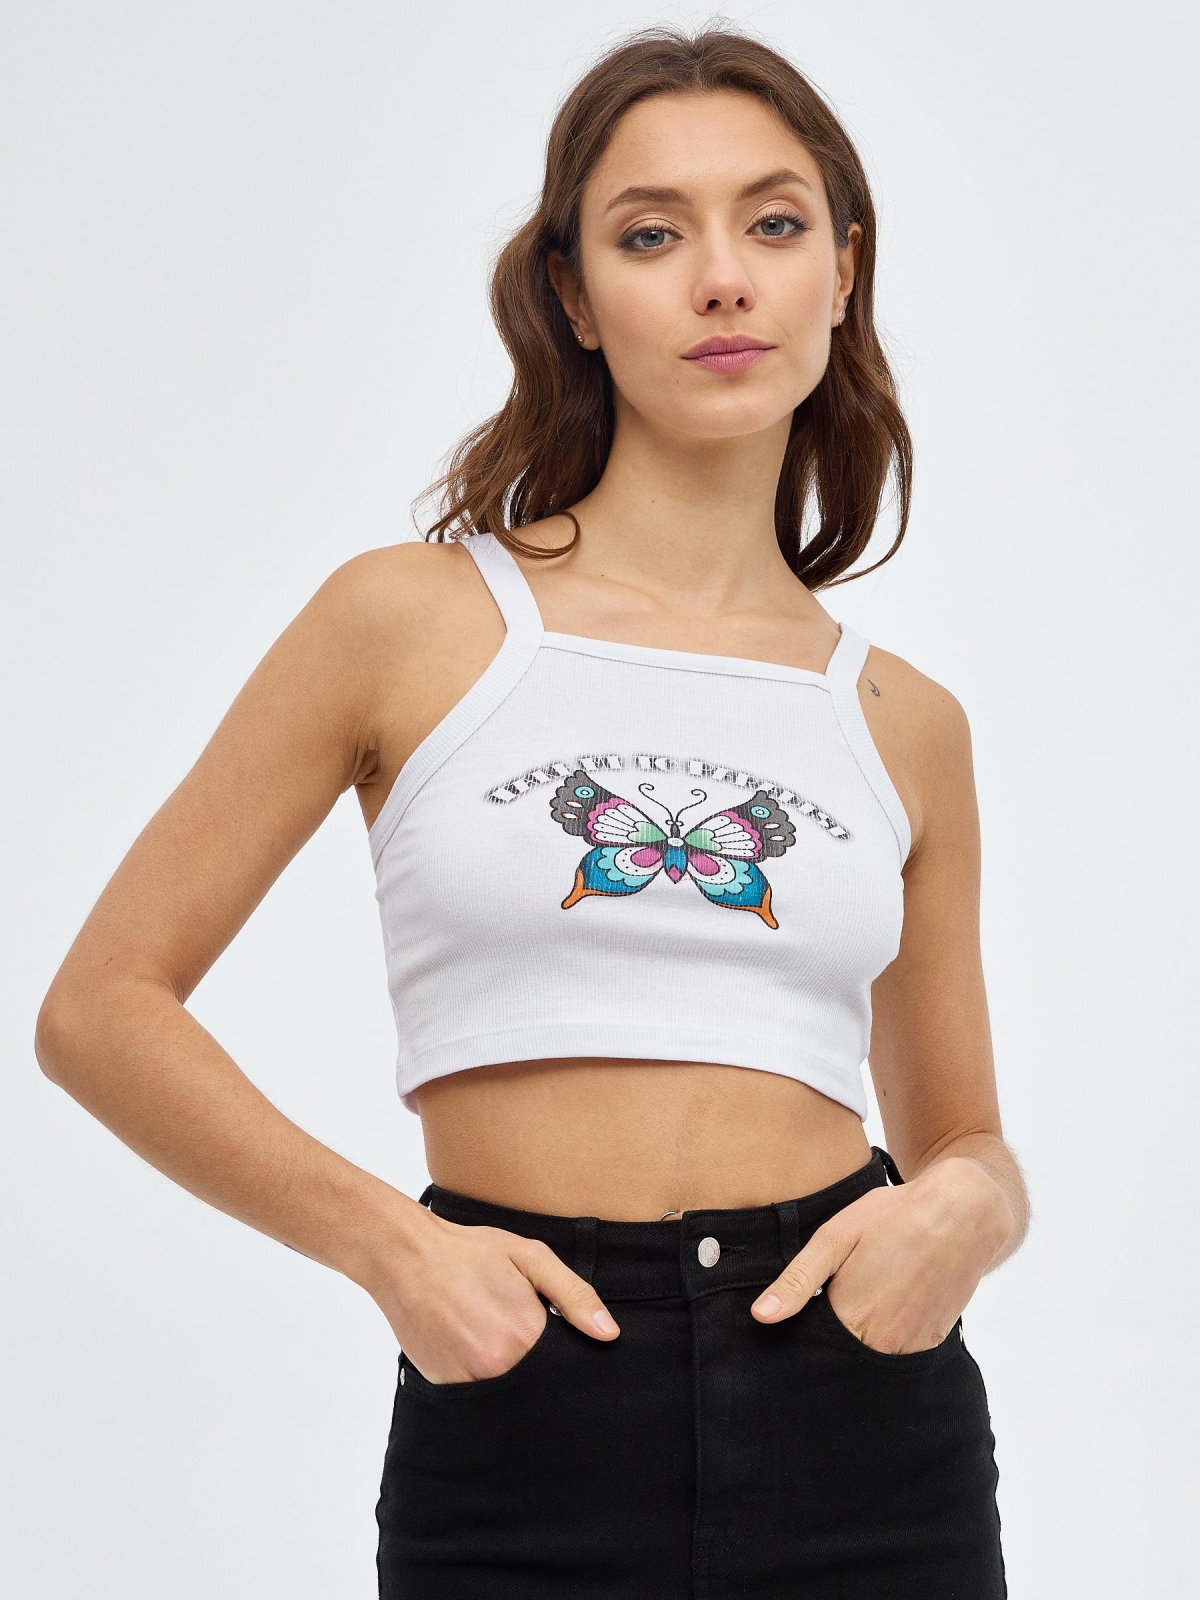 Butterfly crop top white middle front view